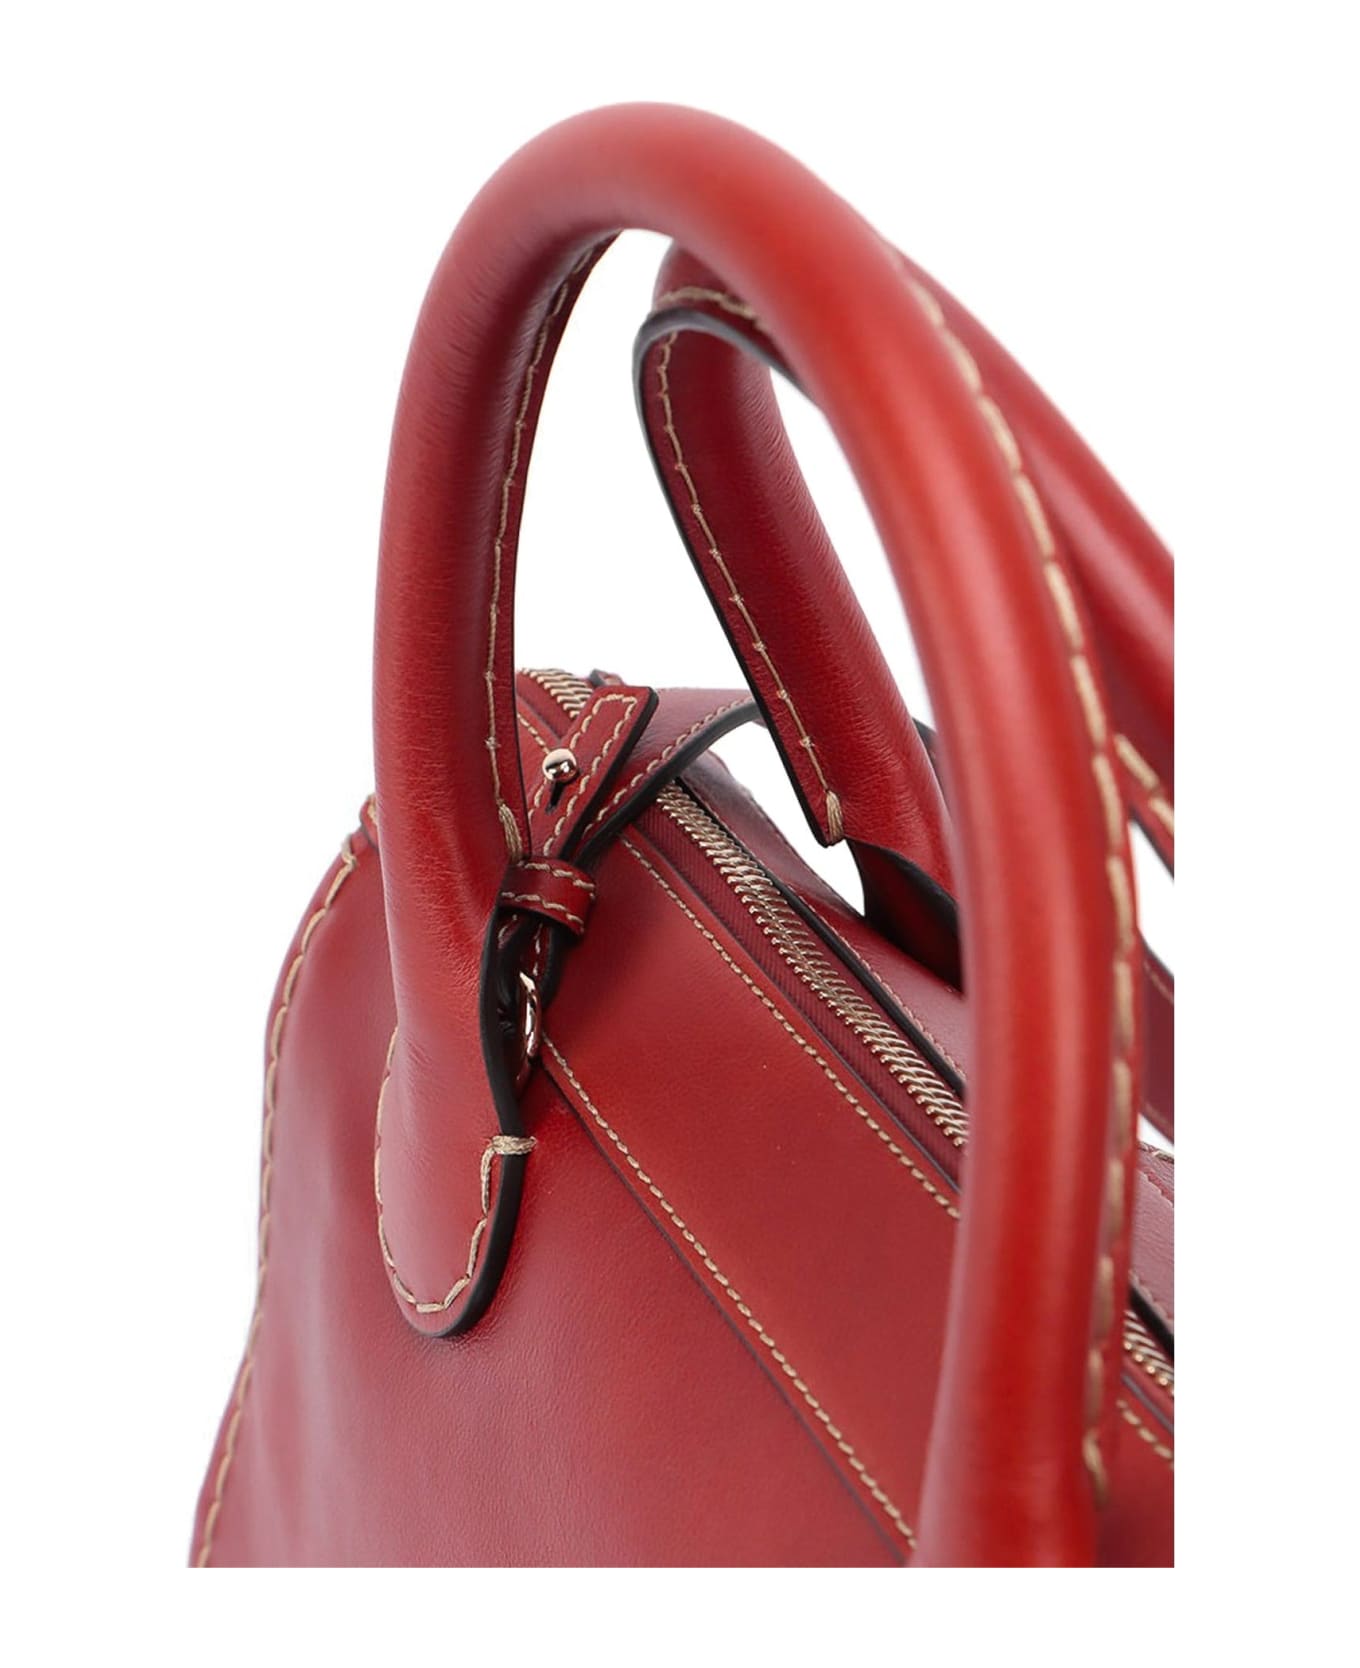 Chloé Edith Leather Tote Bag - Brown